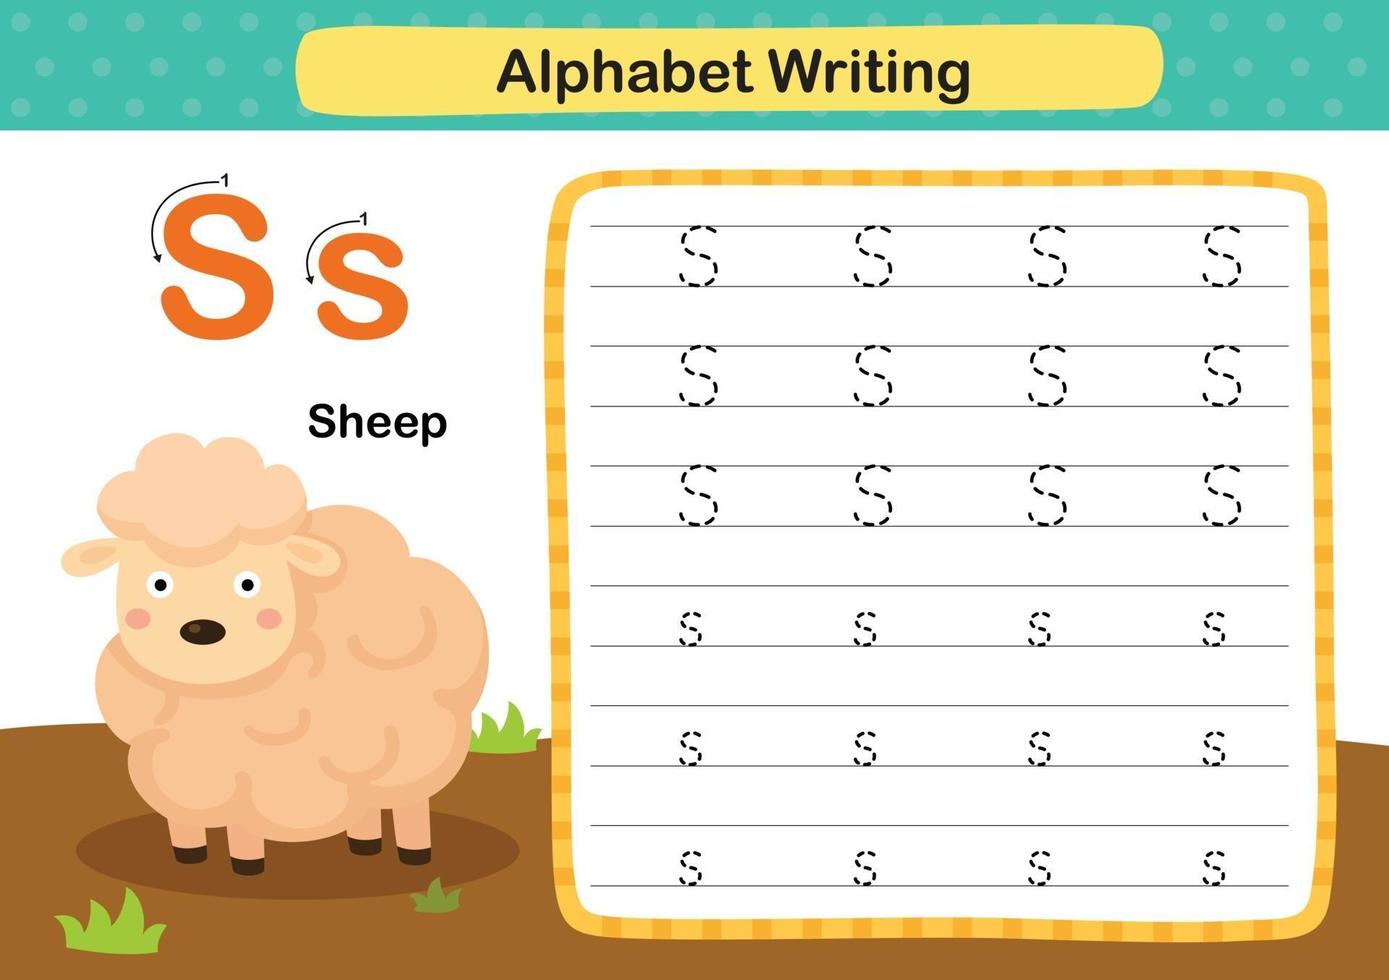 Alphabet Letter S-Sheep exercise with cartoon vocabulary illustration, vector